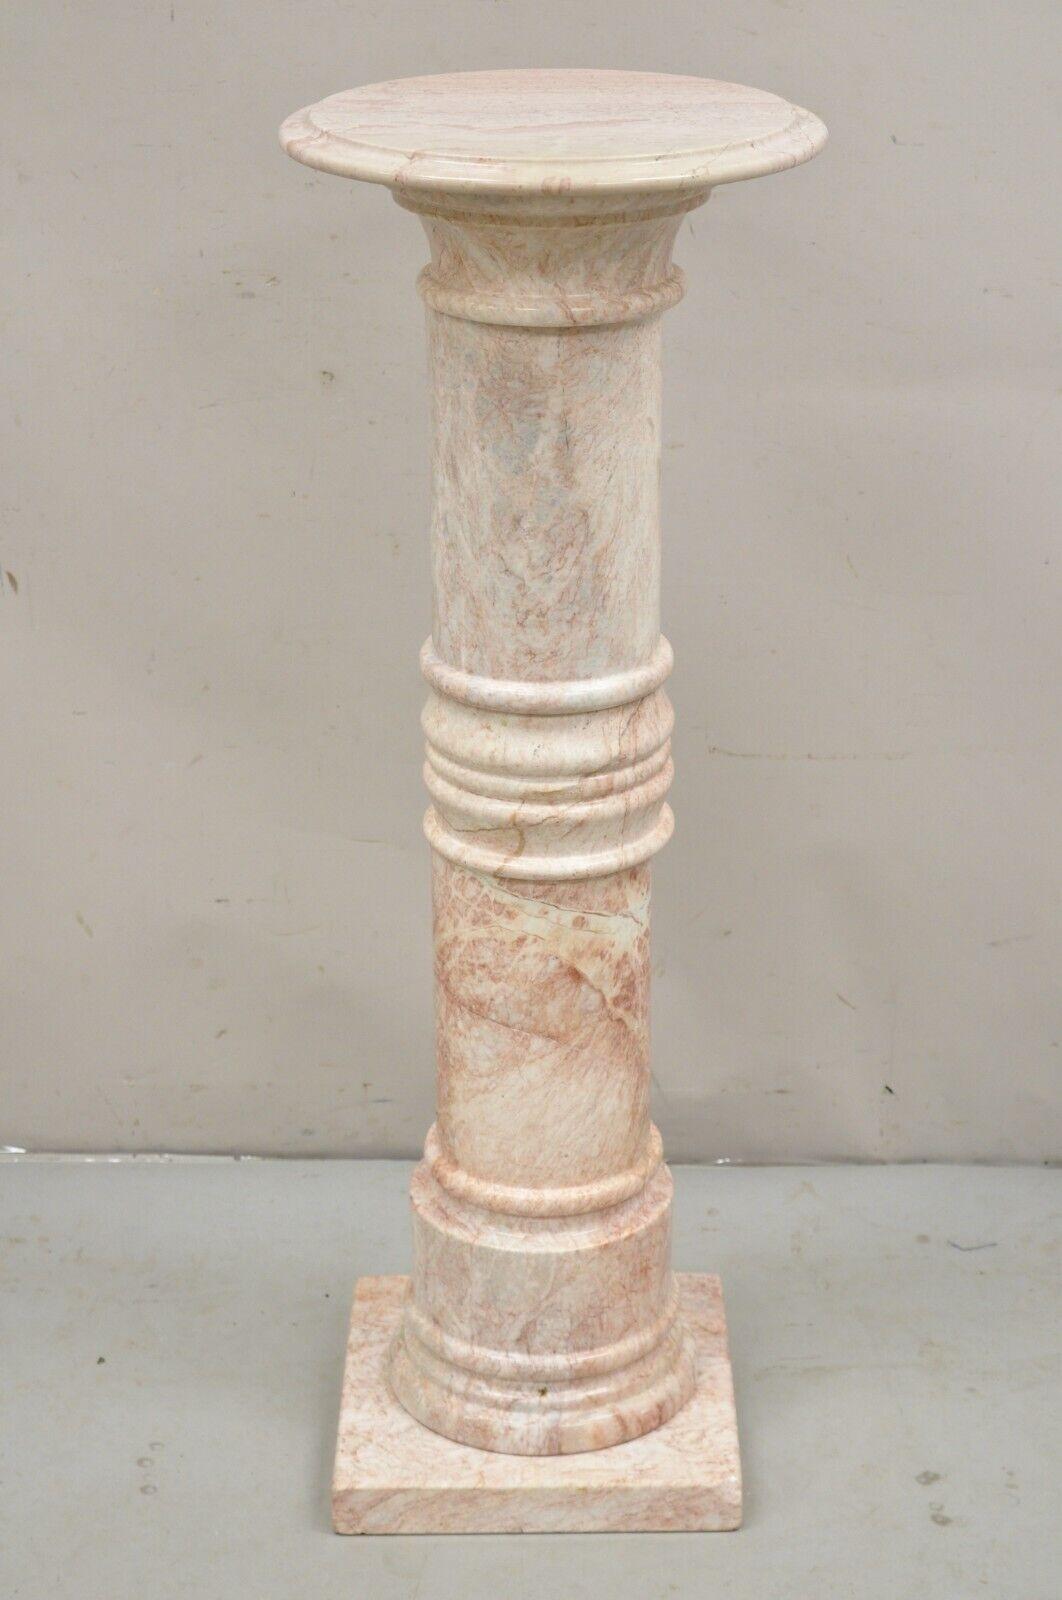 Vintage Italian Pink Marble Classical Style Round Column Pedestal Plant Stand. Item features Beautiful pink veins, very nice vintage pedestal, approx 160 lbs. Circa Mid 20th Century. Measurements: 39.5